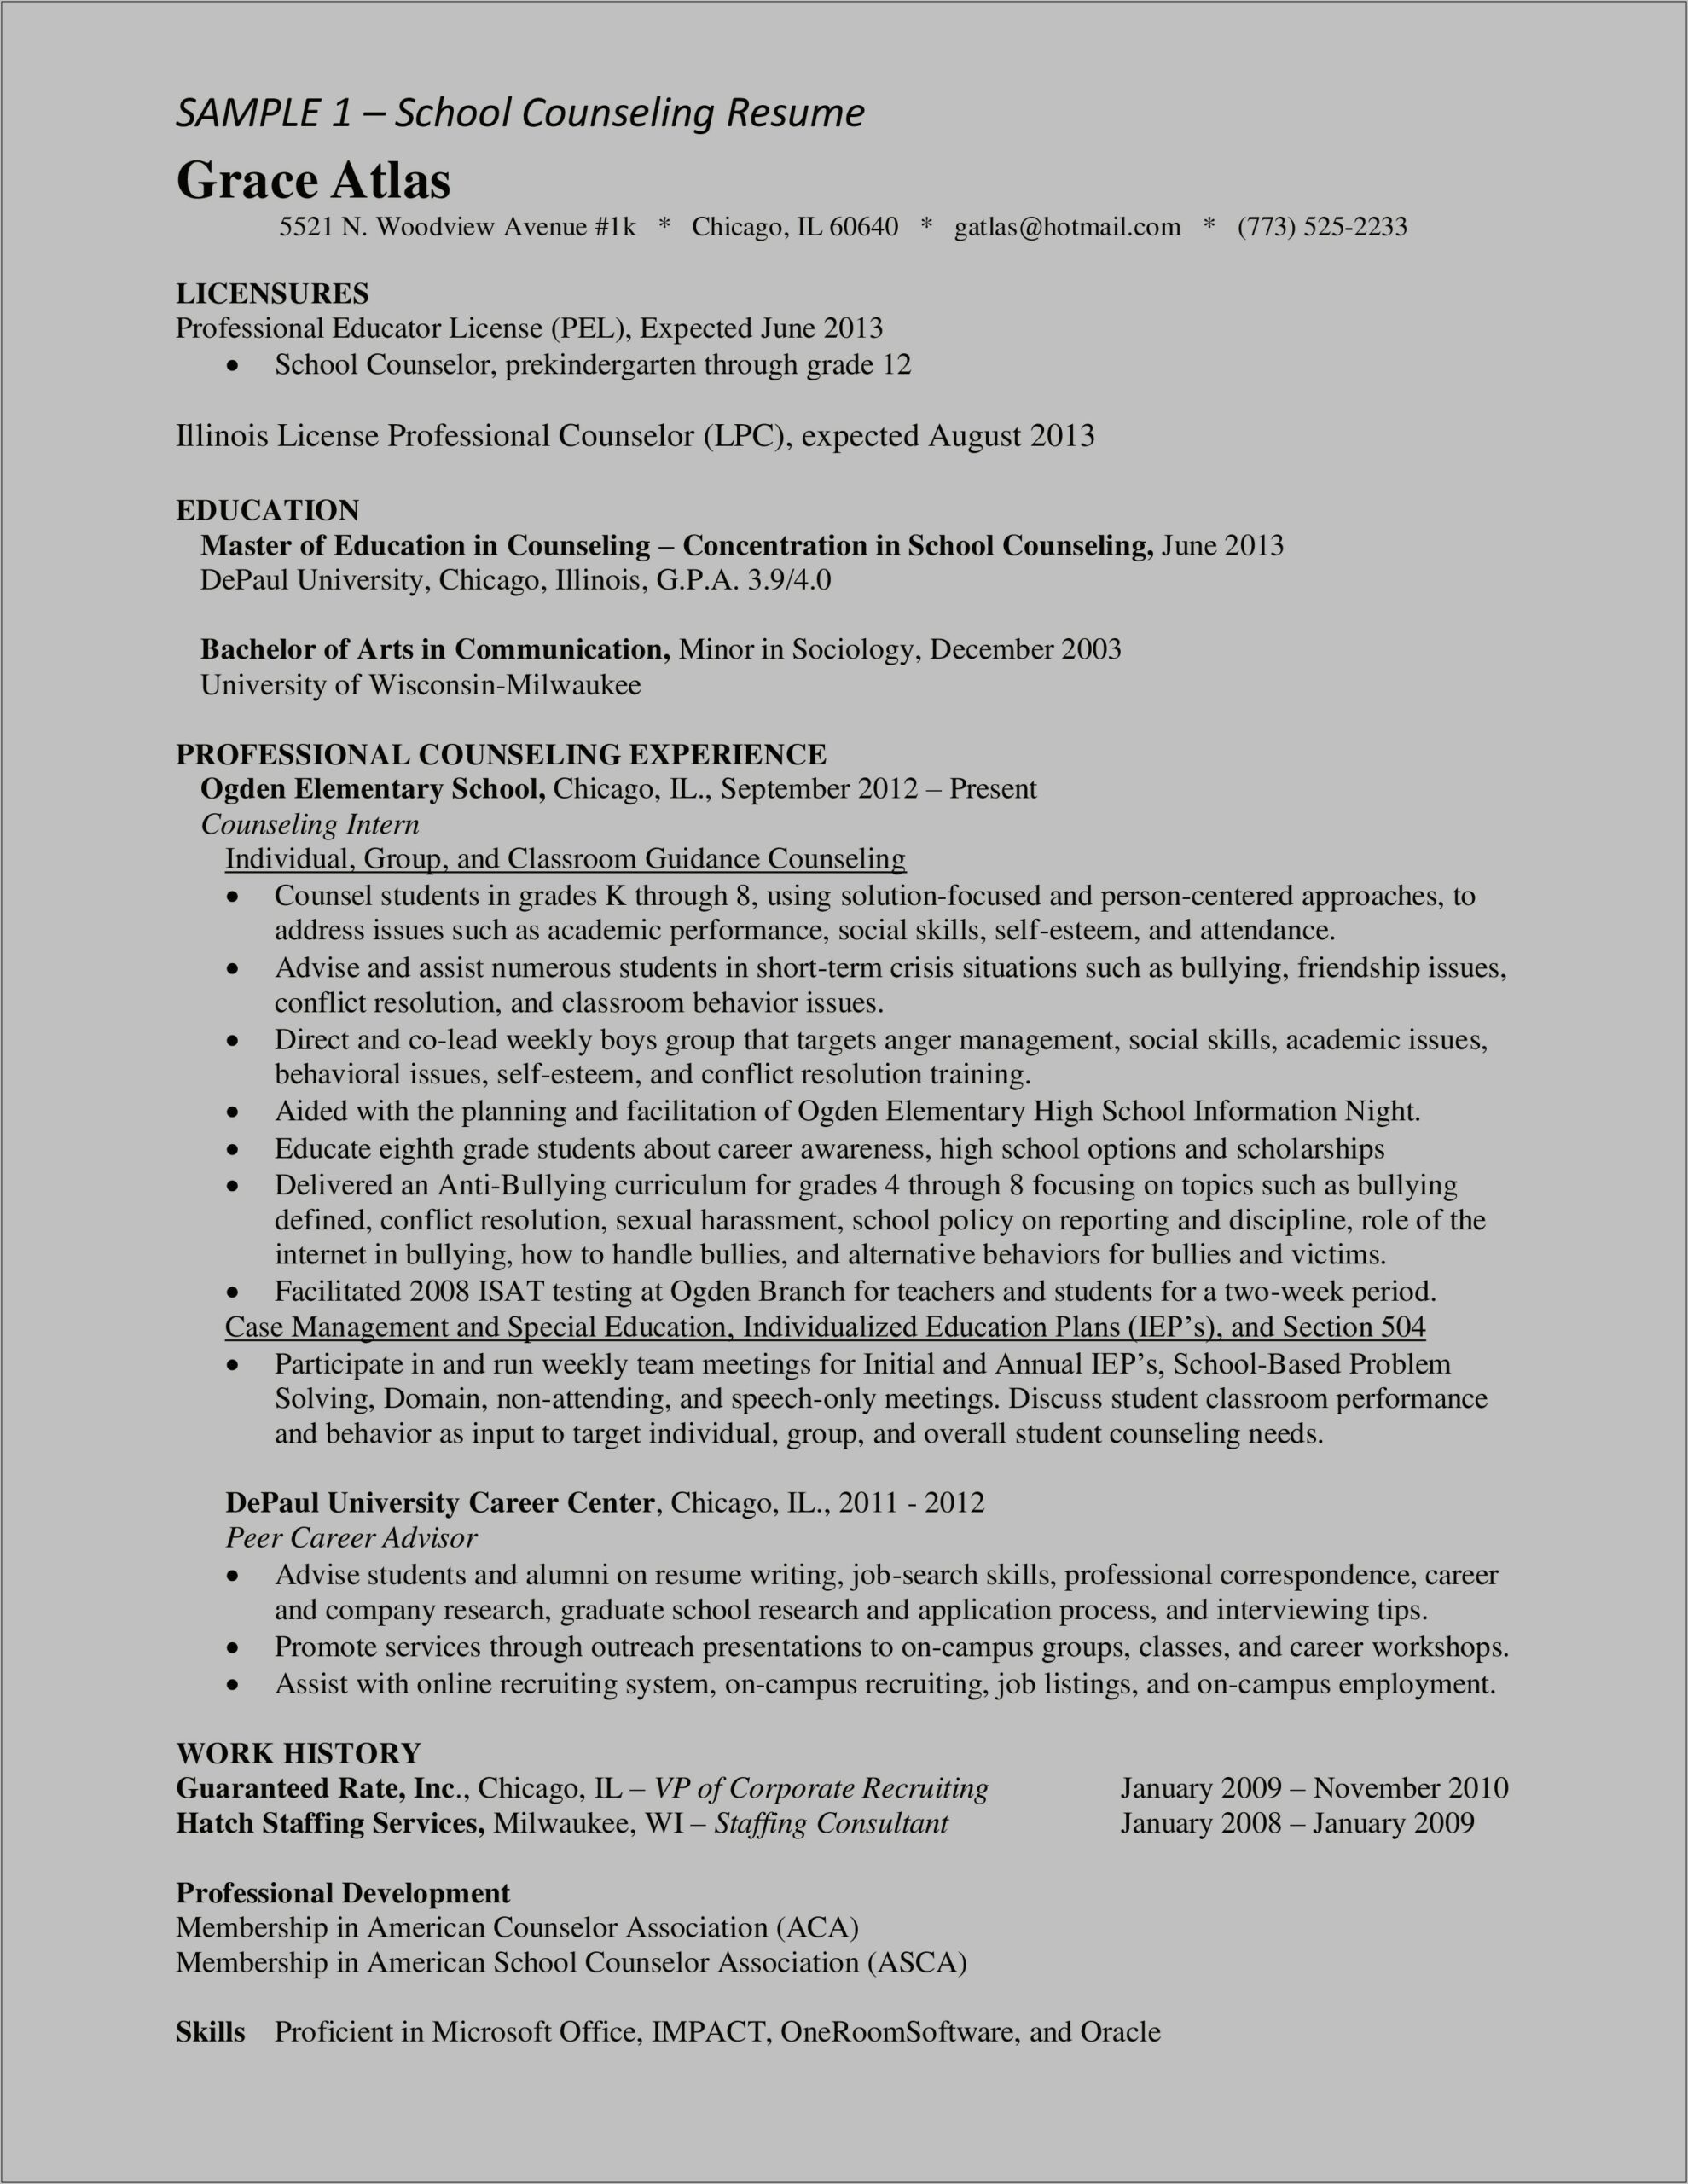 Sample School Counselor Resume Objective